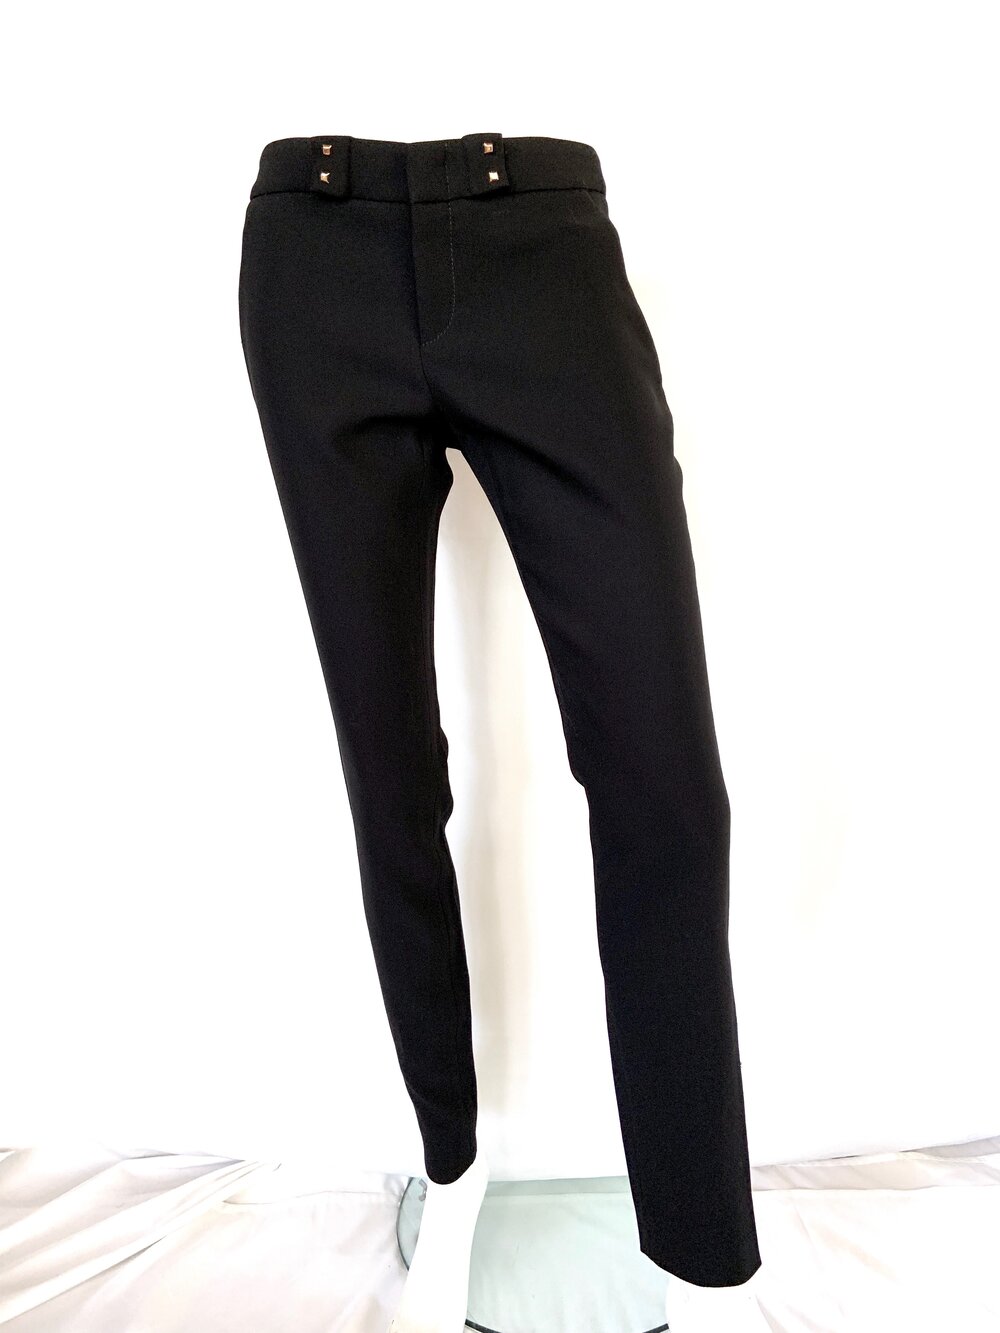 Gucci Black Wool Pants with Gold Detail (40 IT) — GLOBALLY FABULOUS |  Authenticated Luxury Resale